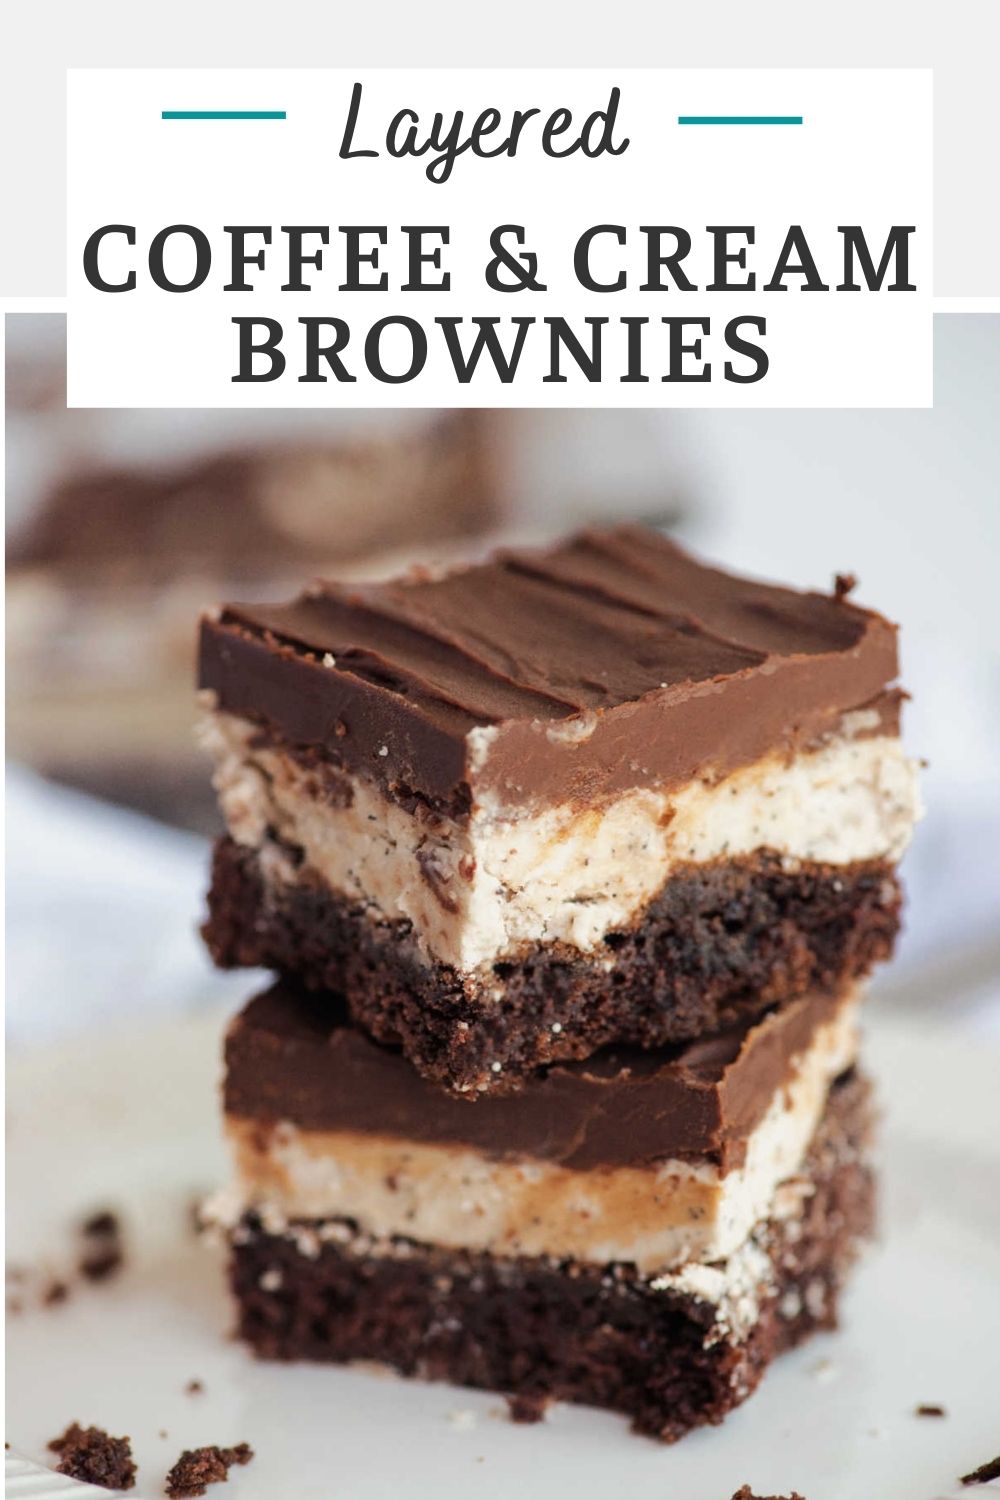 Coffee and cream brownies are the perfect combination of rich gooey chocolate brownies and creamy coffee buttercream. They are topped with a fudgy glaze to really make them over the top good.